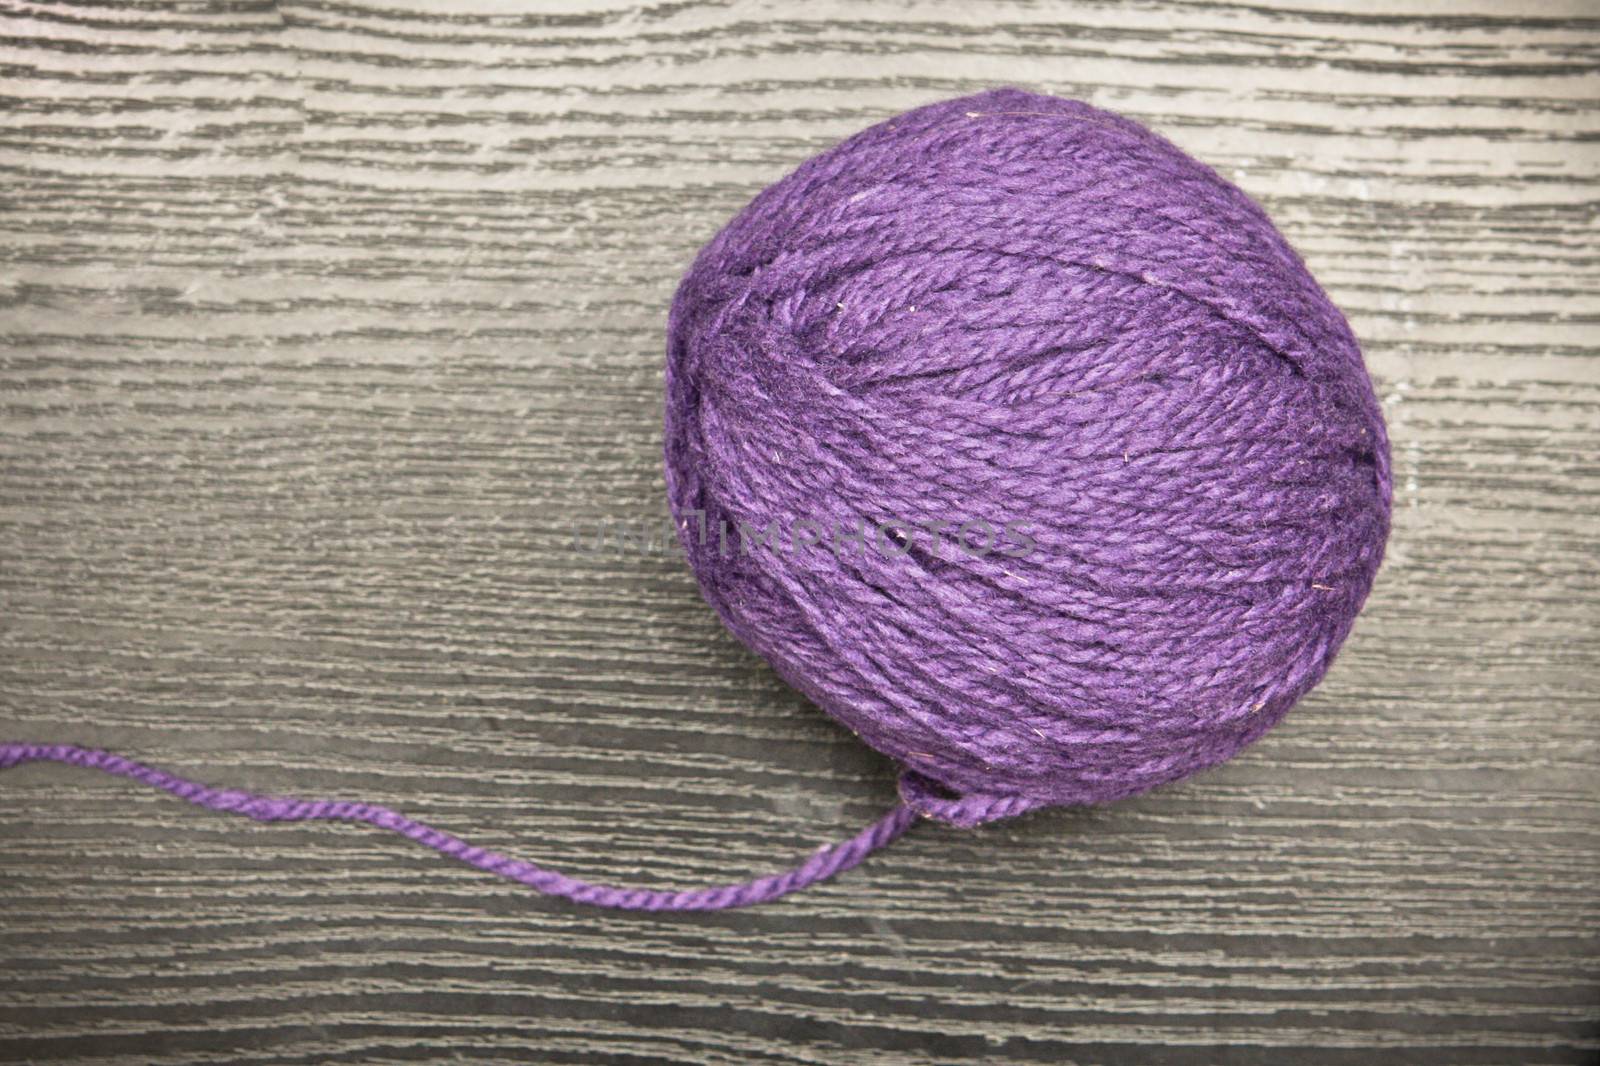 Ball of purple wool on a wooden surface